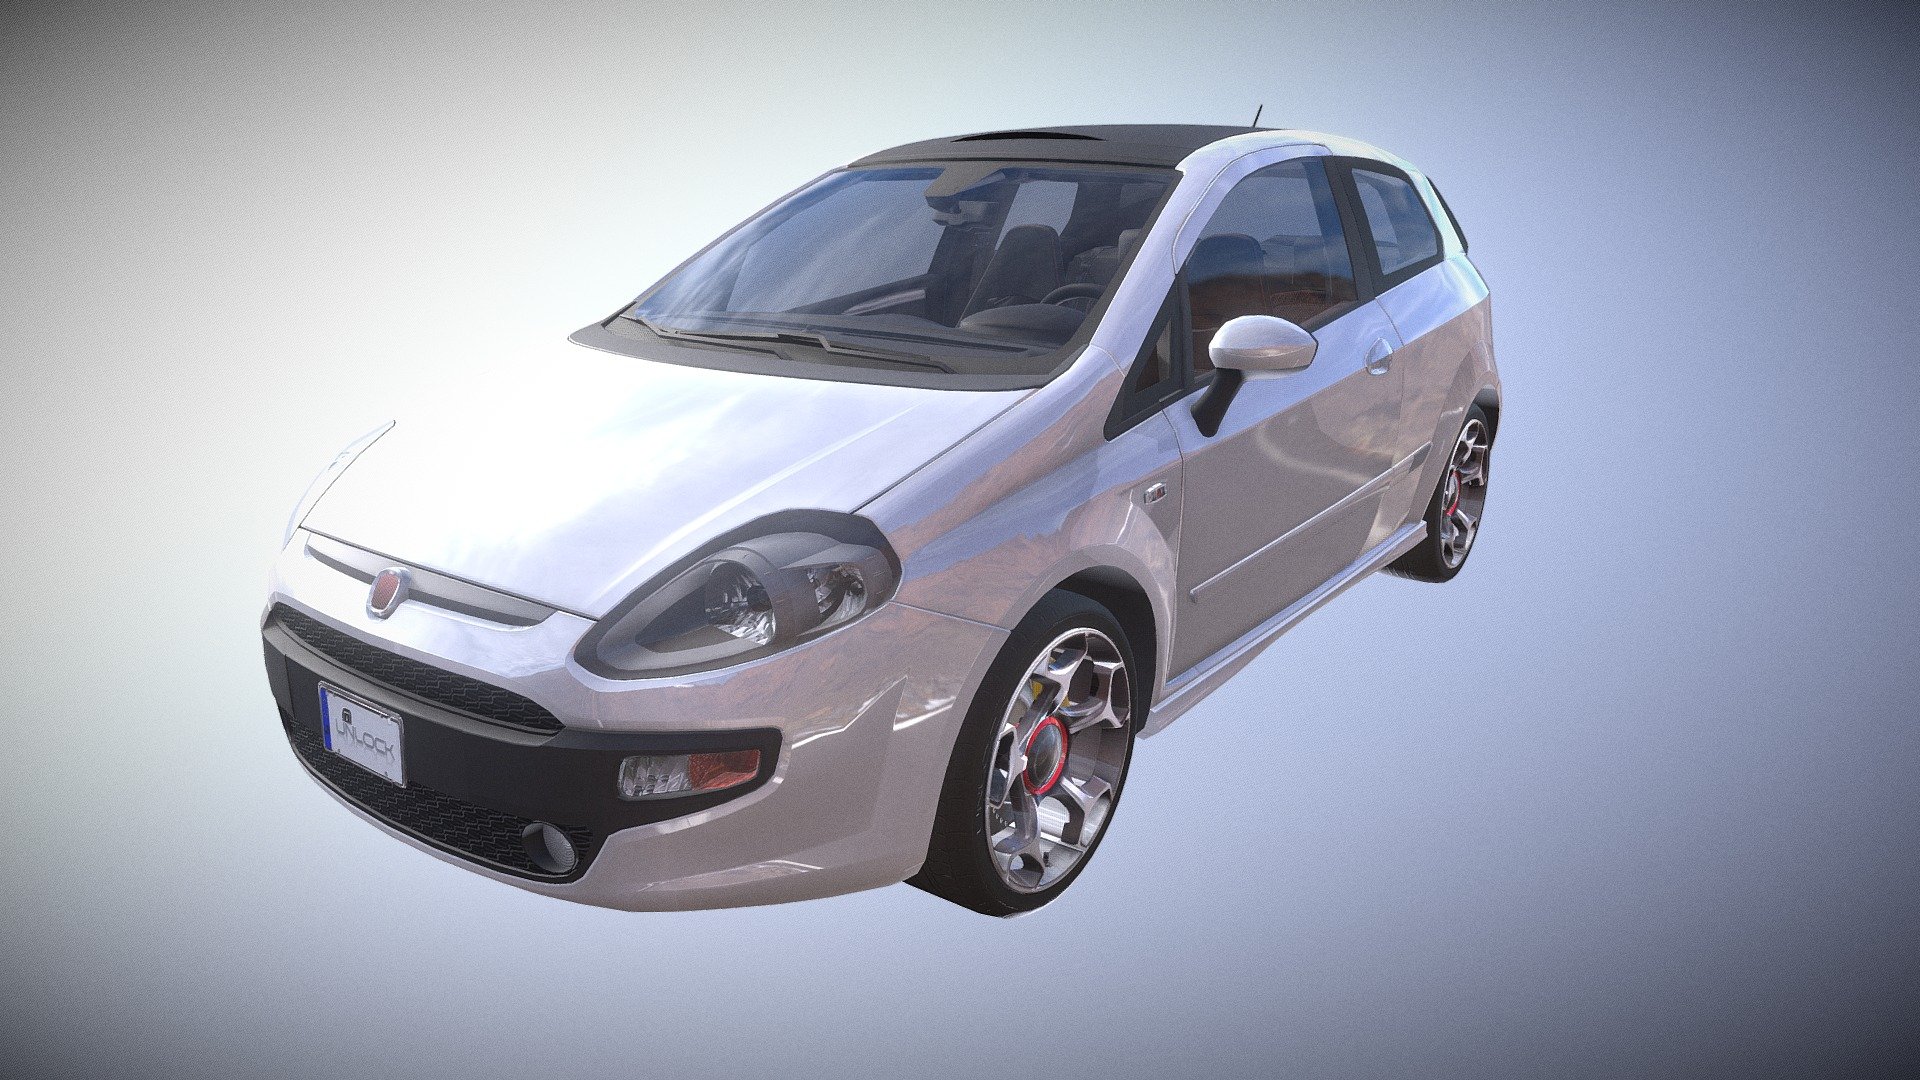 Subscribe and like my videos- Youtube.

https://www.youtube.com/channel/UCk6SVrjLxZofrigOtafpevA?view_as=subscriber

Economy car vehicle 3d model for games.
 - Unlock economy car #02 - 3D model by UnlockGameAssets 3d model